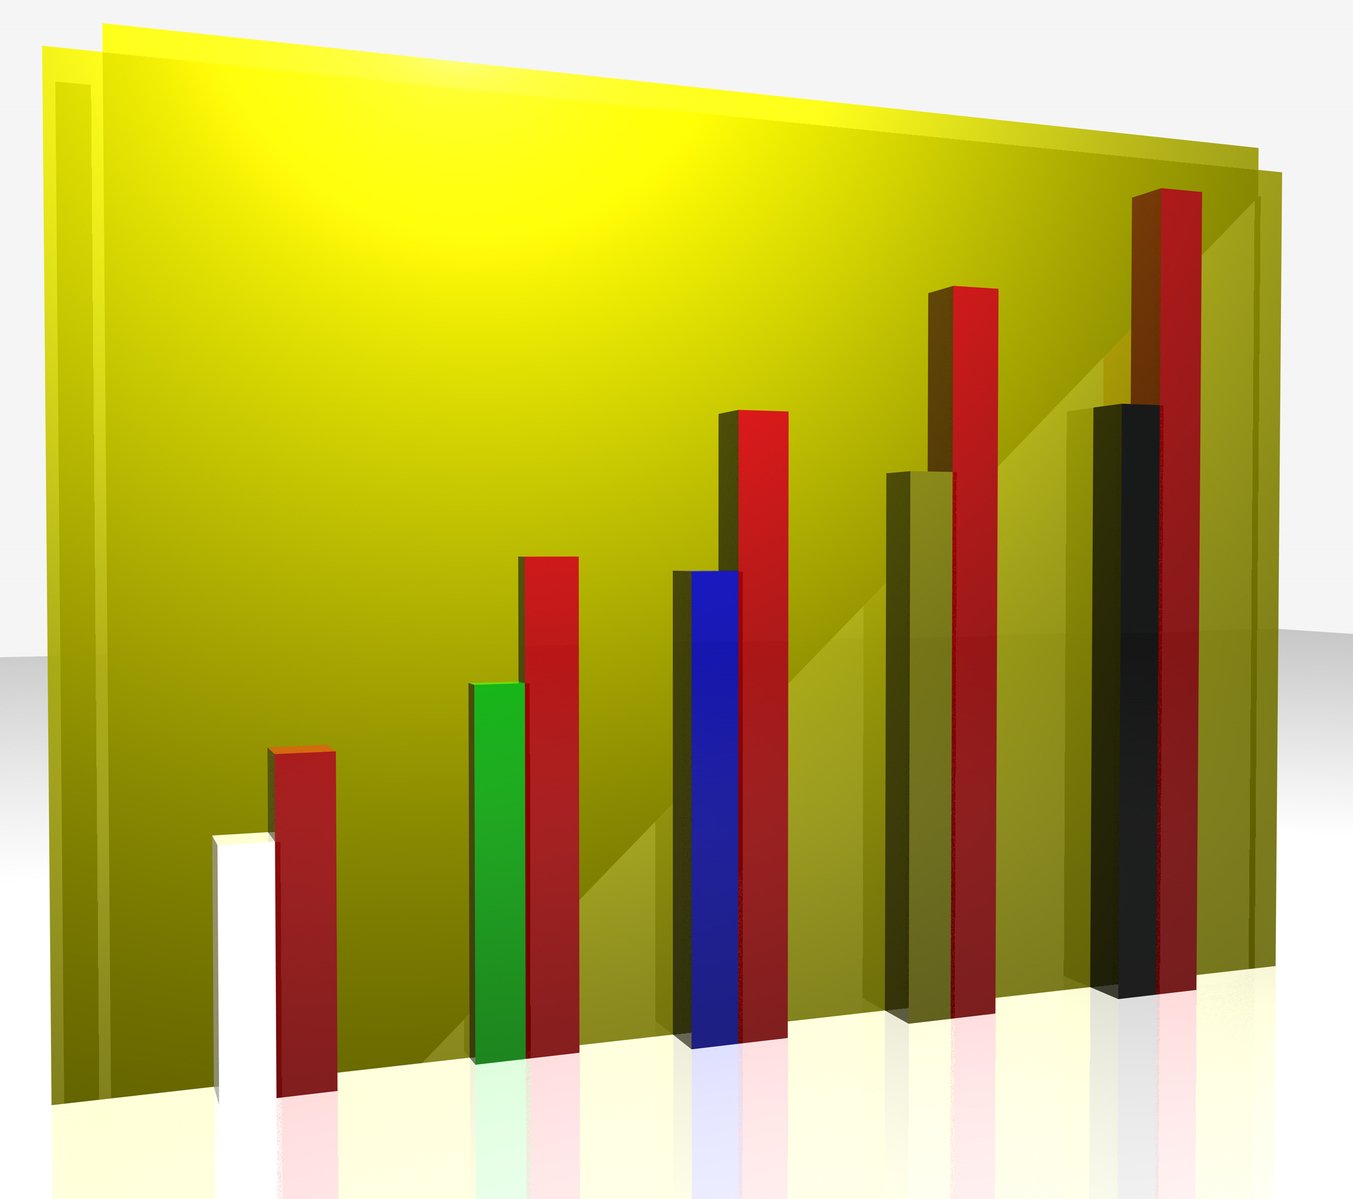 3d bar chart with reflection, reflecting light